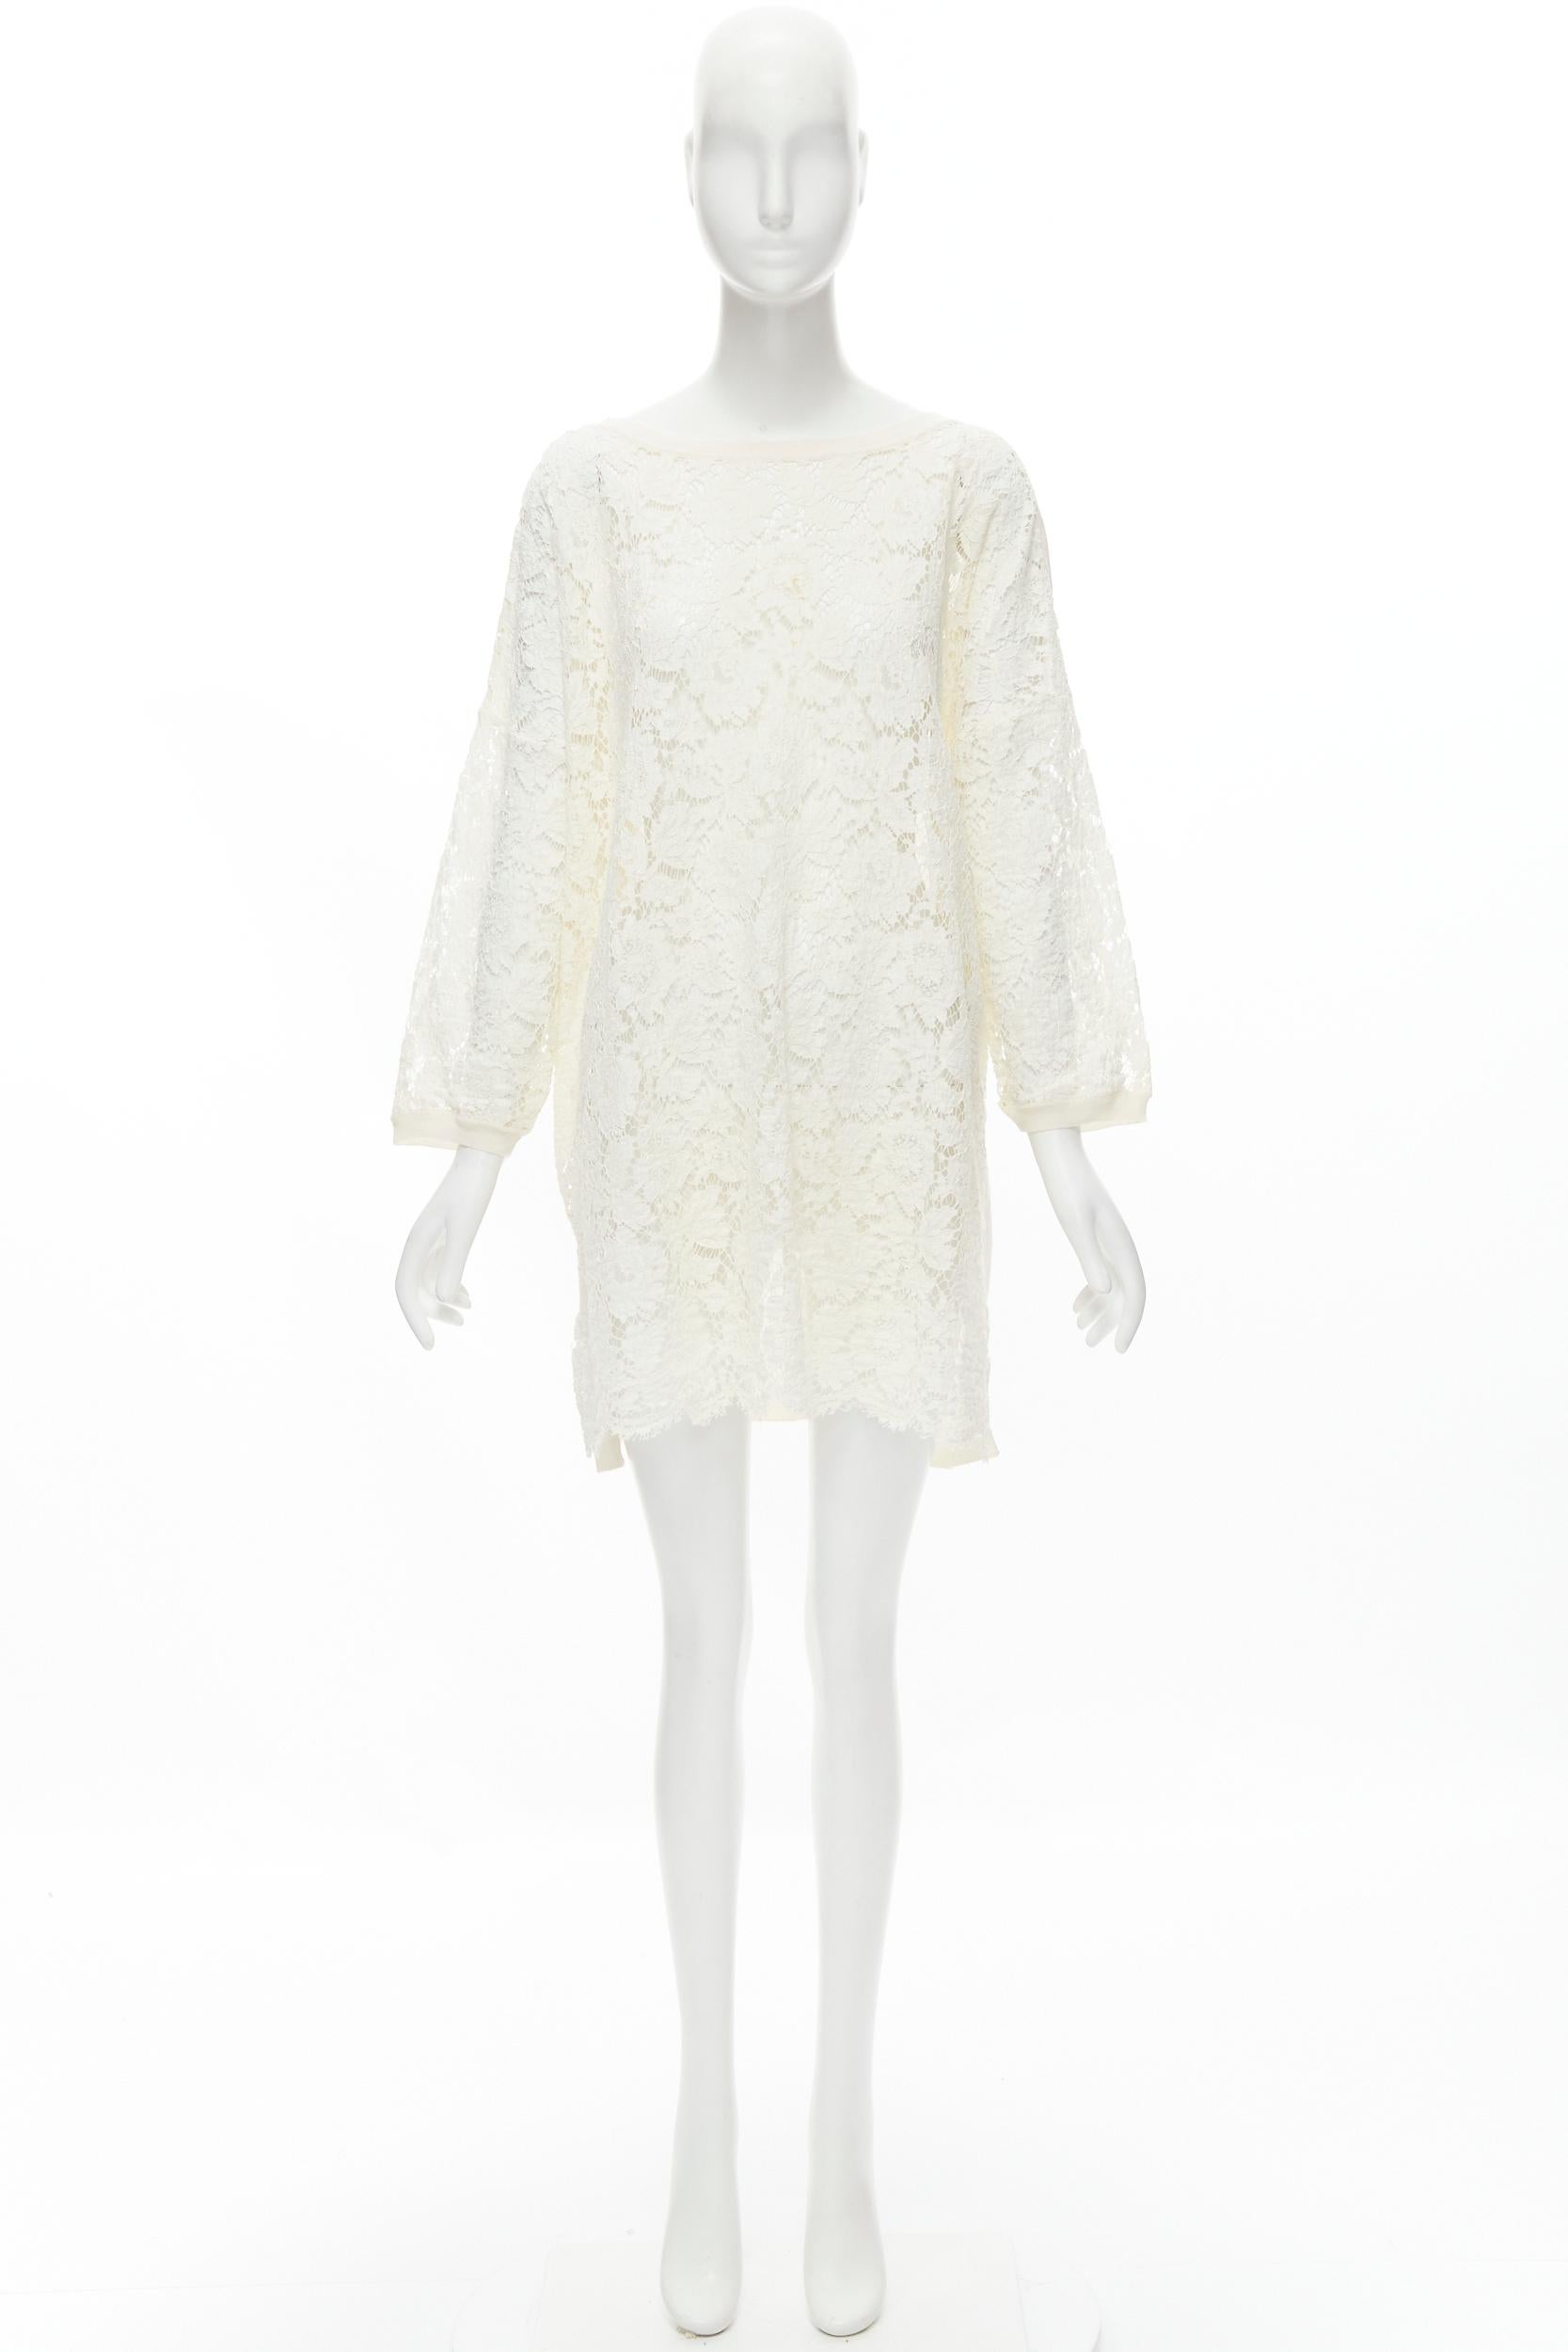 VALENTINO cream floral lace front wool silk cashmere knit back casual dress  6